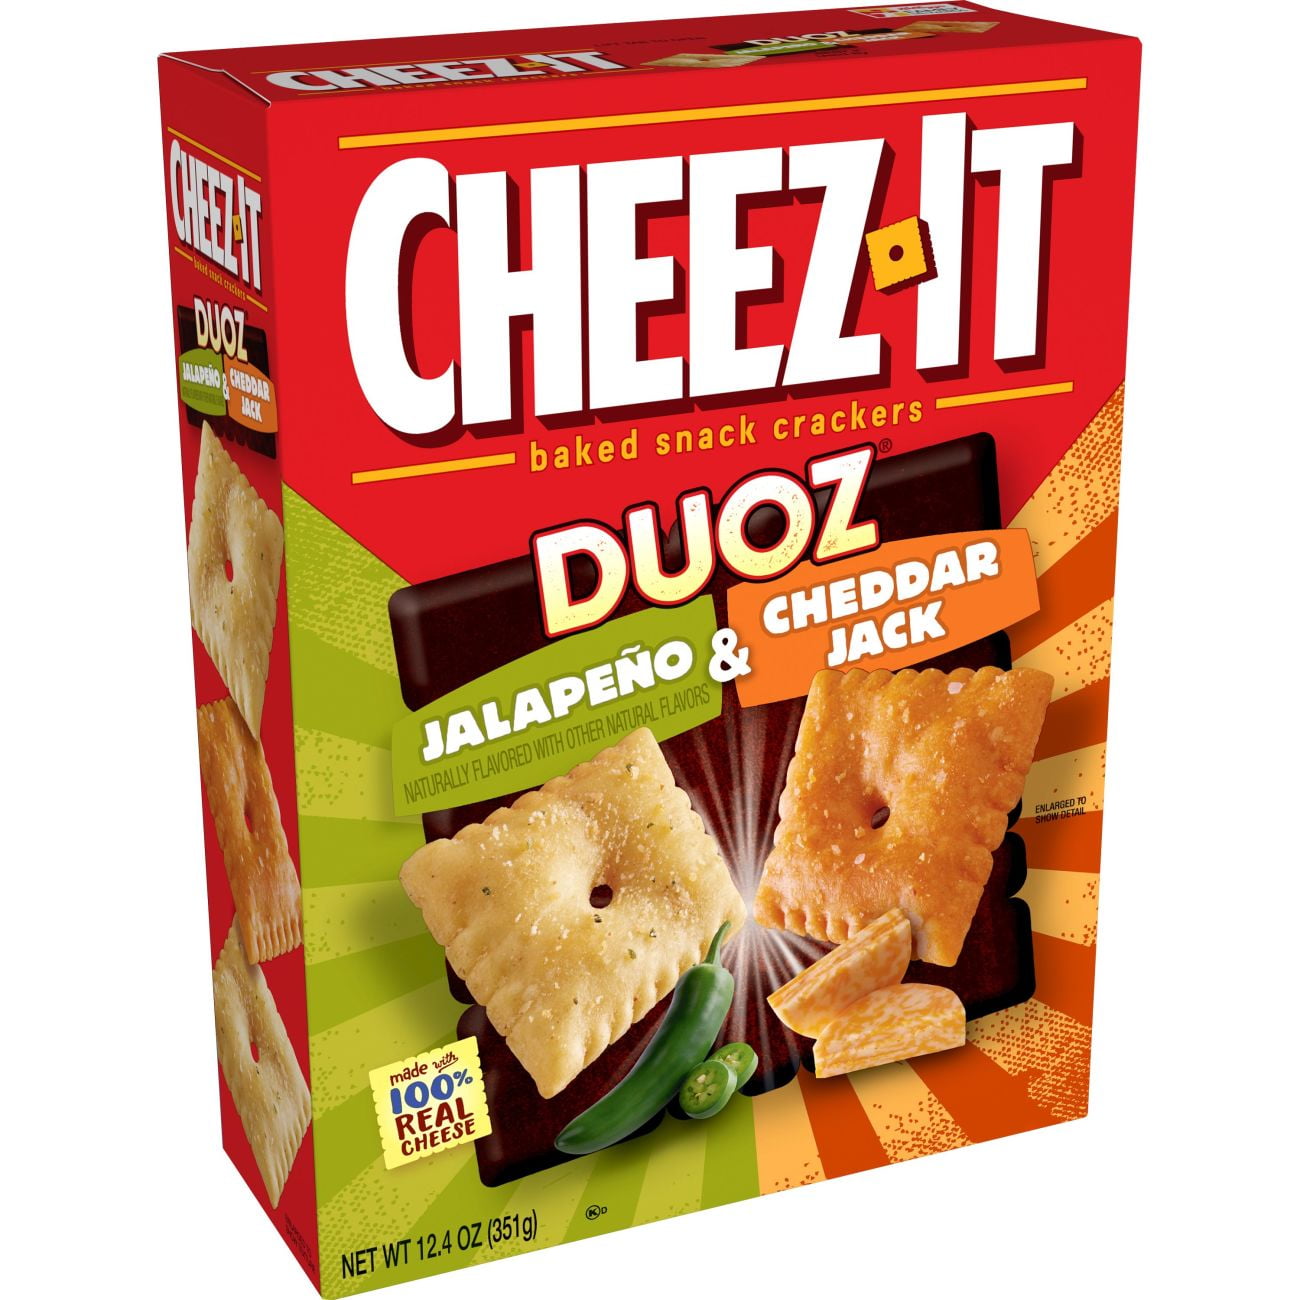 Cheez It Baked Snack Cheese Crackers Cheddar Jack 12 4 Oz